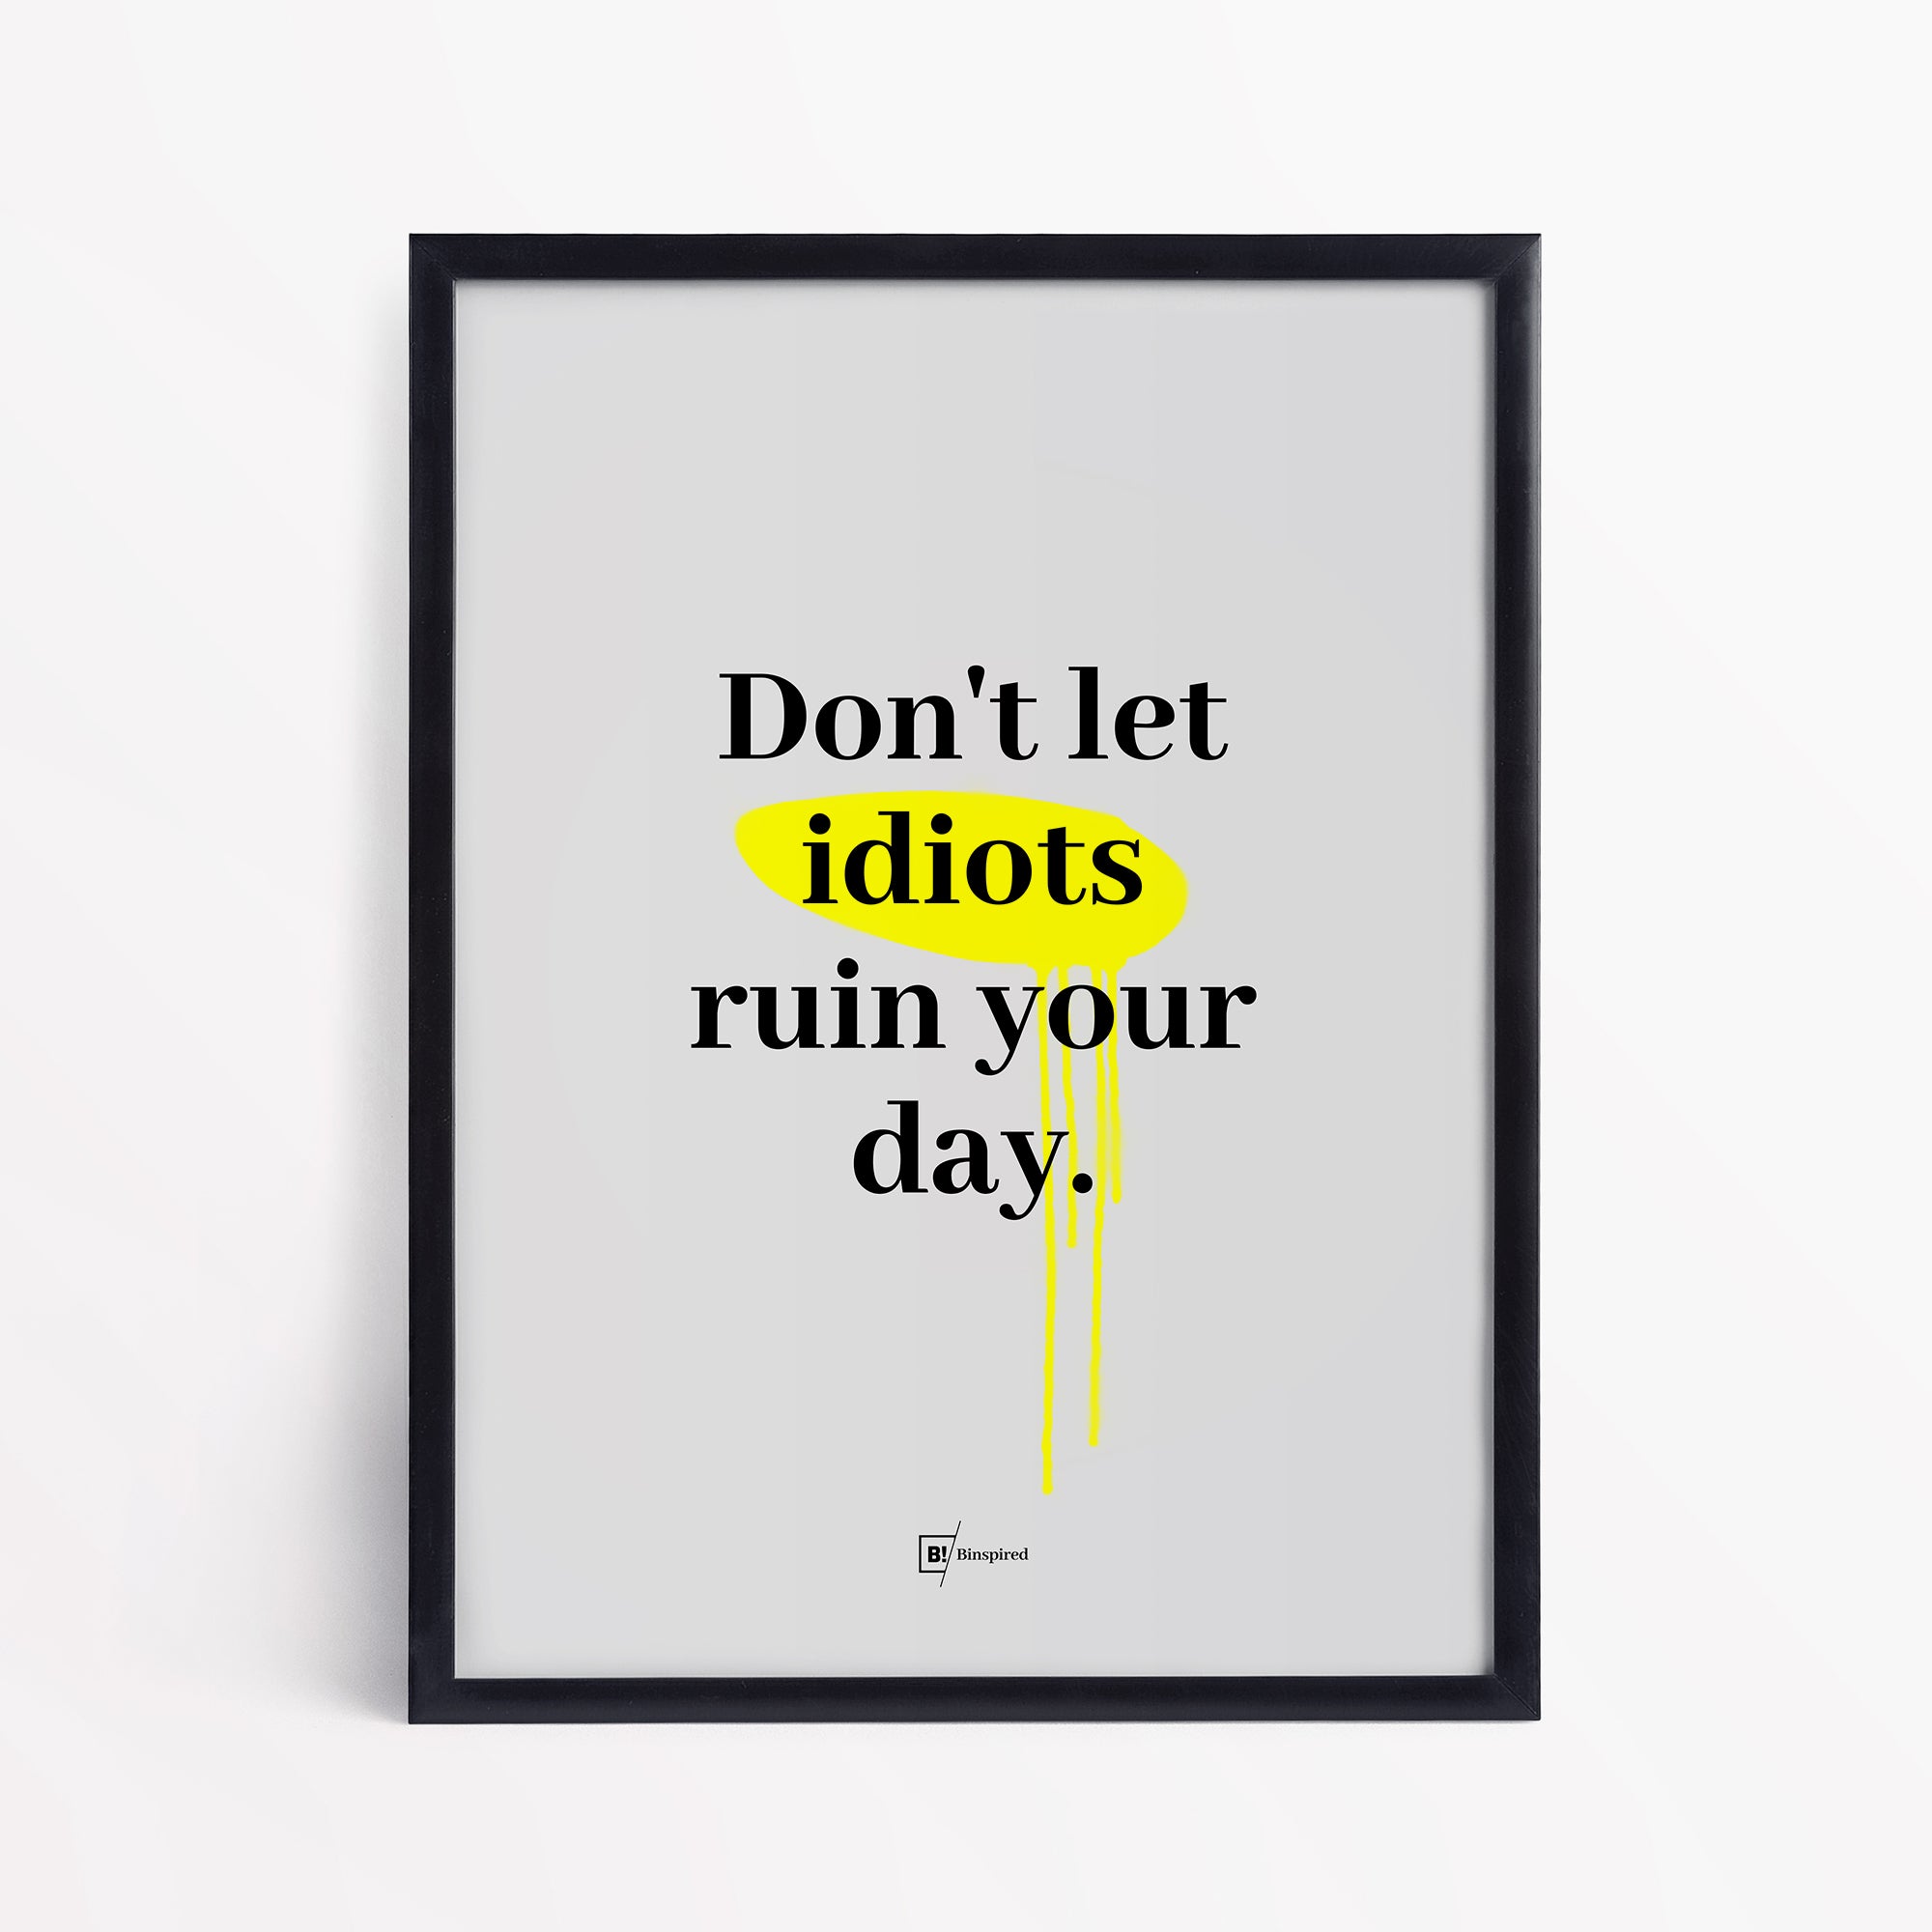 Be inspired by our "Don't let idiots ruin your day" quote art print! This artwork was printed using the giclée process on archival acid-free paper and is presented in a simple black frame that captures its timeless beauty in every detail.